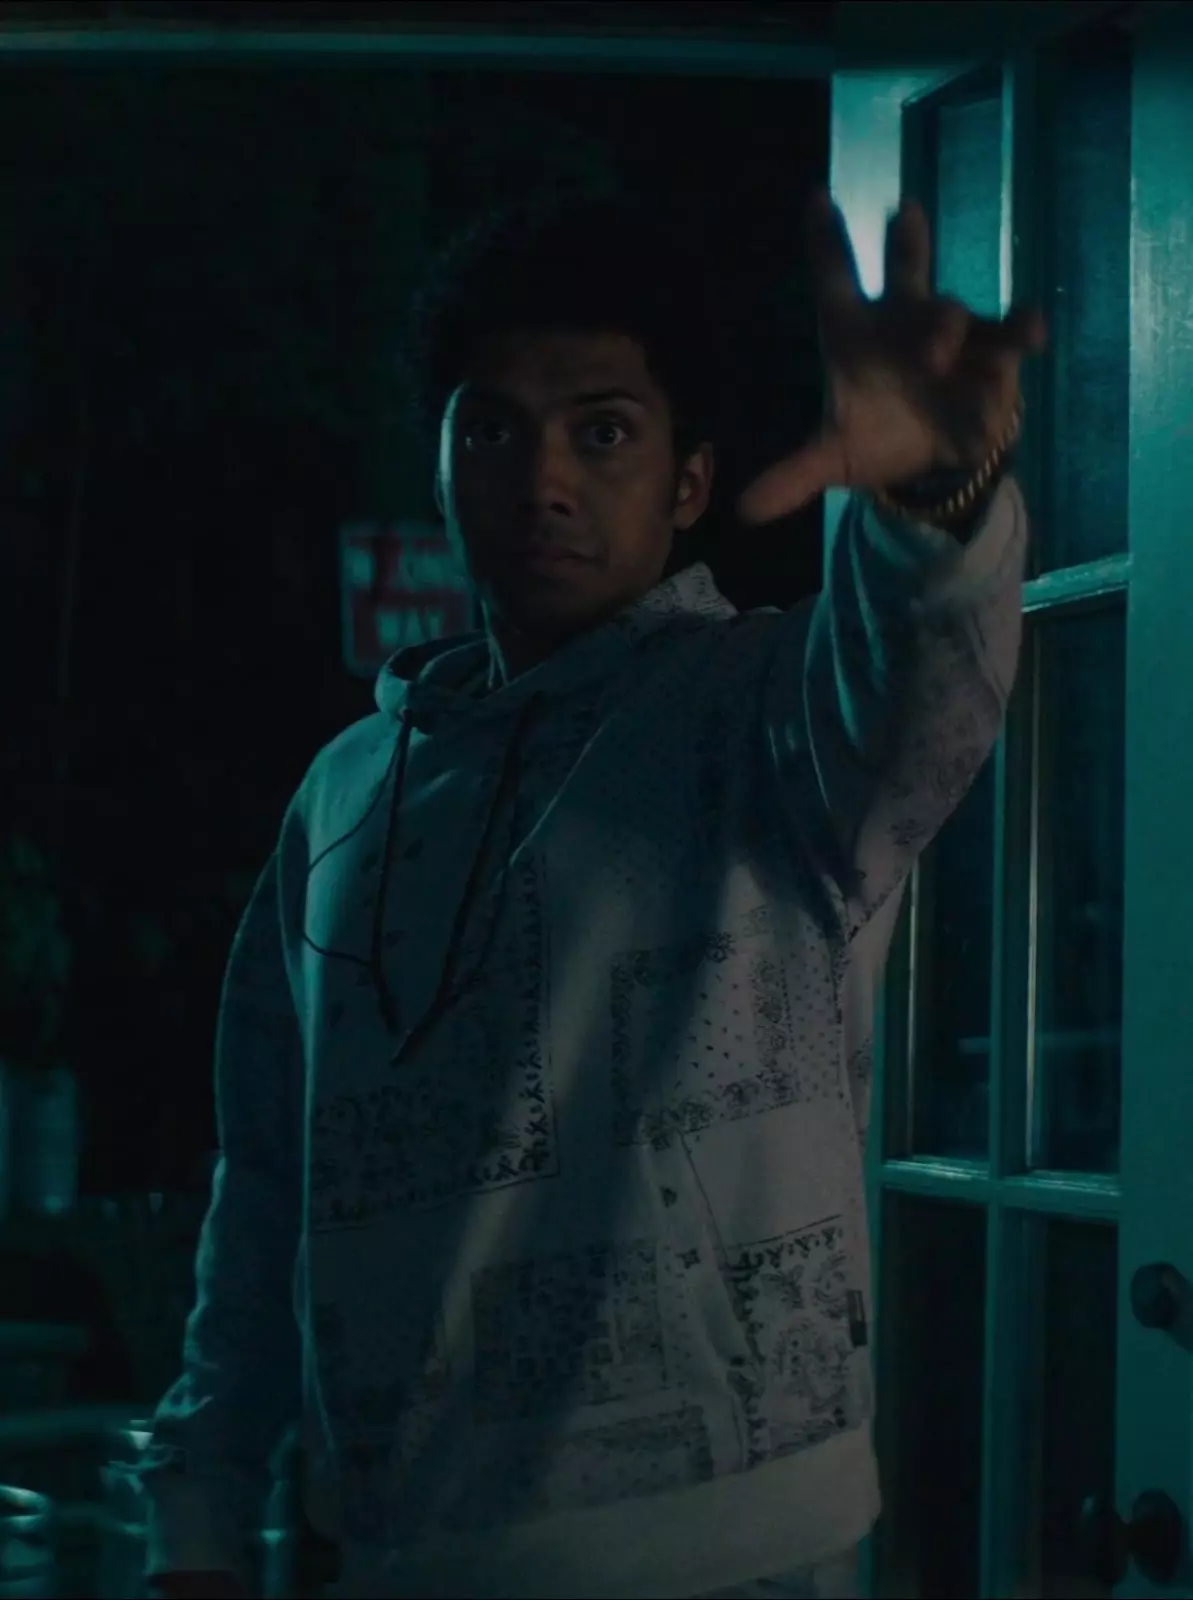 Worn on Gen V TV Show - Ethnic Pattern Hoodie Worn by Chance Perdomo as Andre Anderson